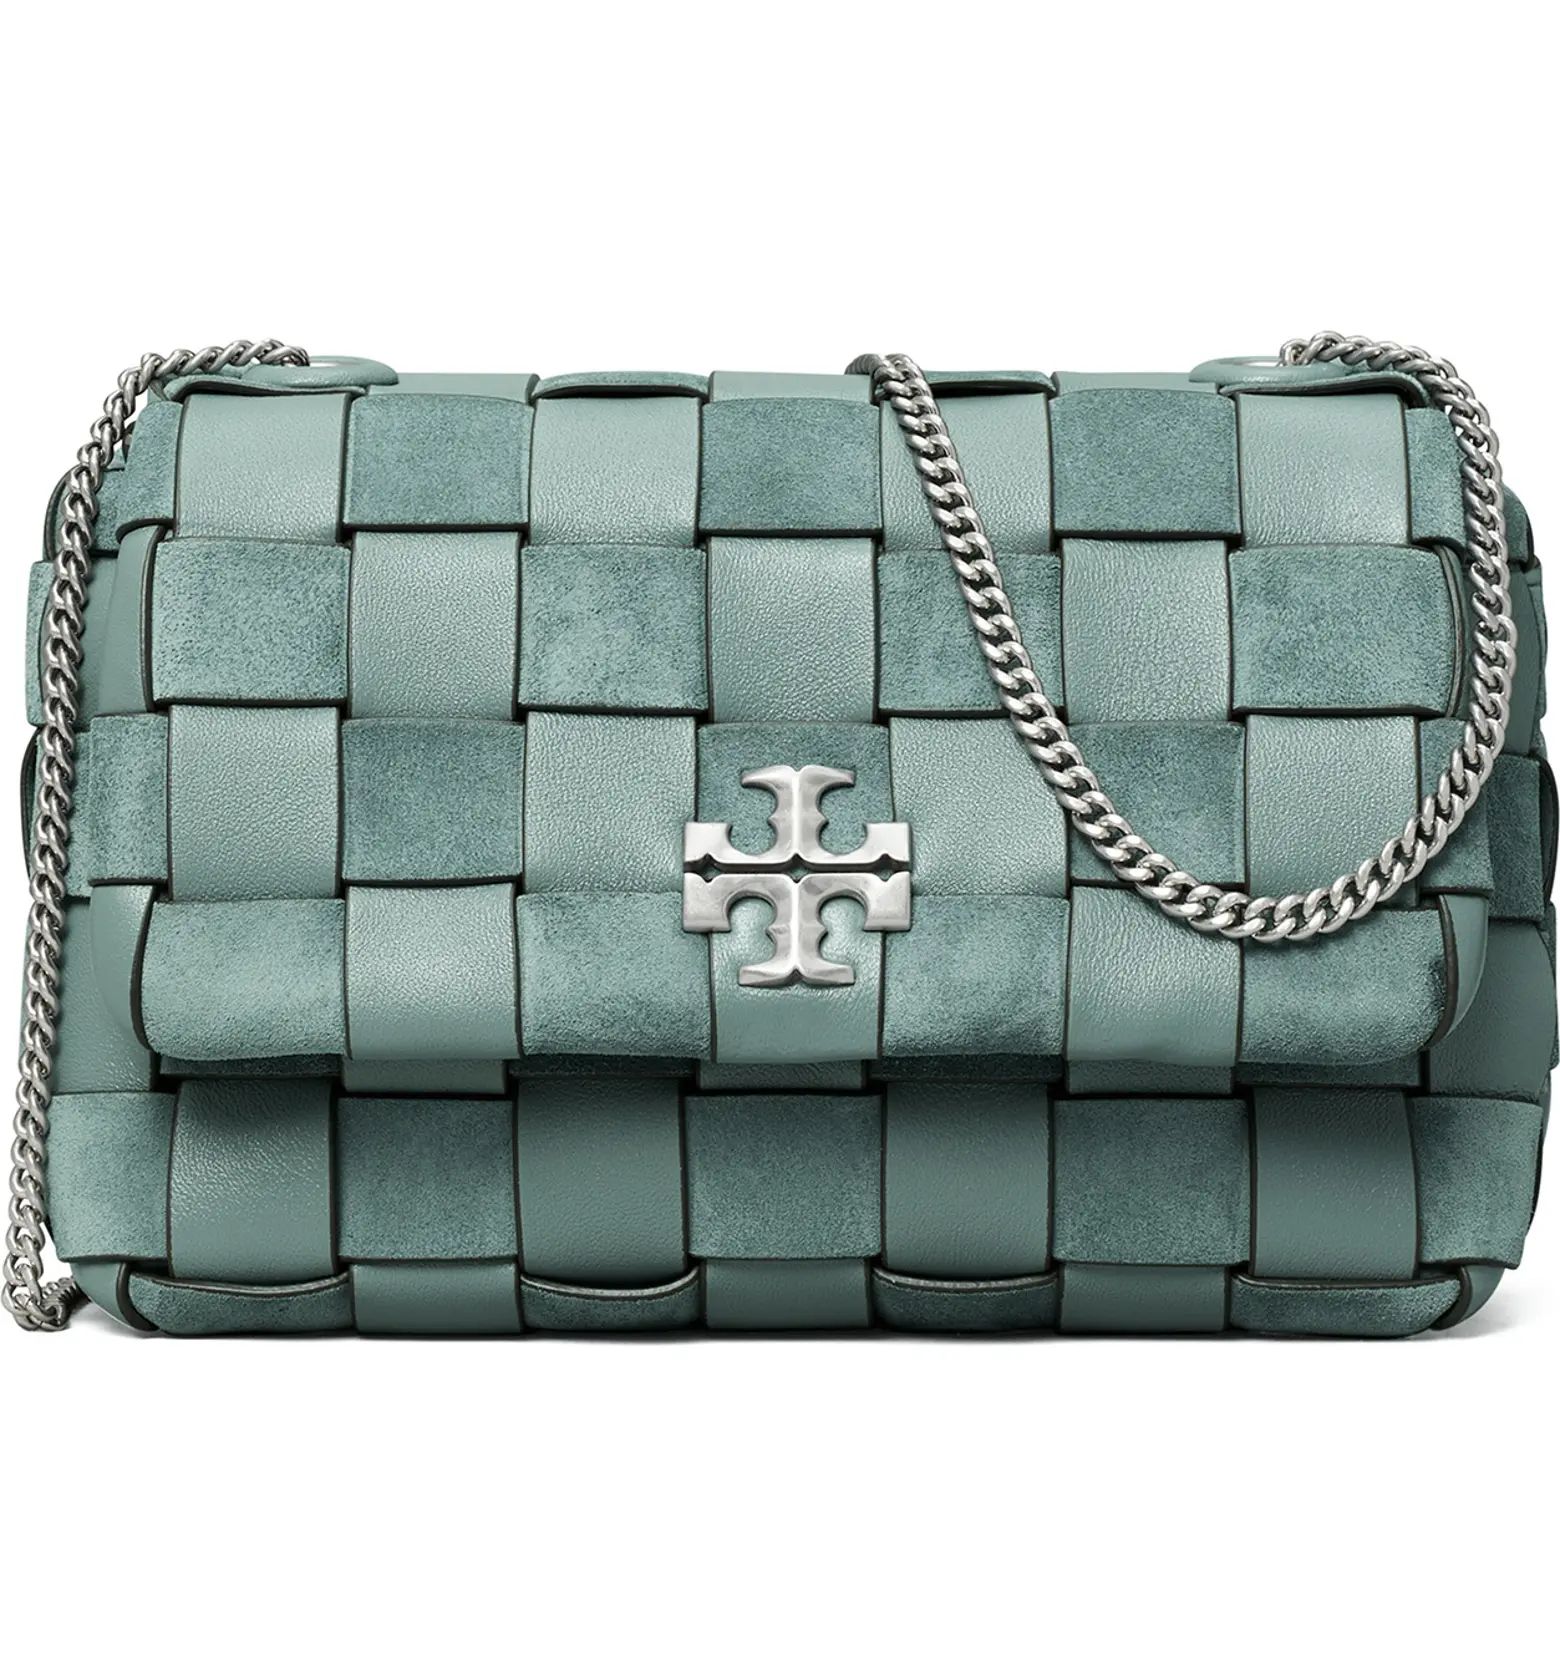 Tory Burch Kira Small Woven Leather Shoulder Bag | Nordstrom | Nordstrom